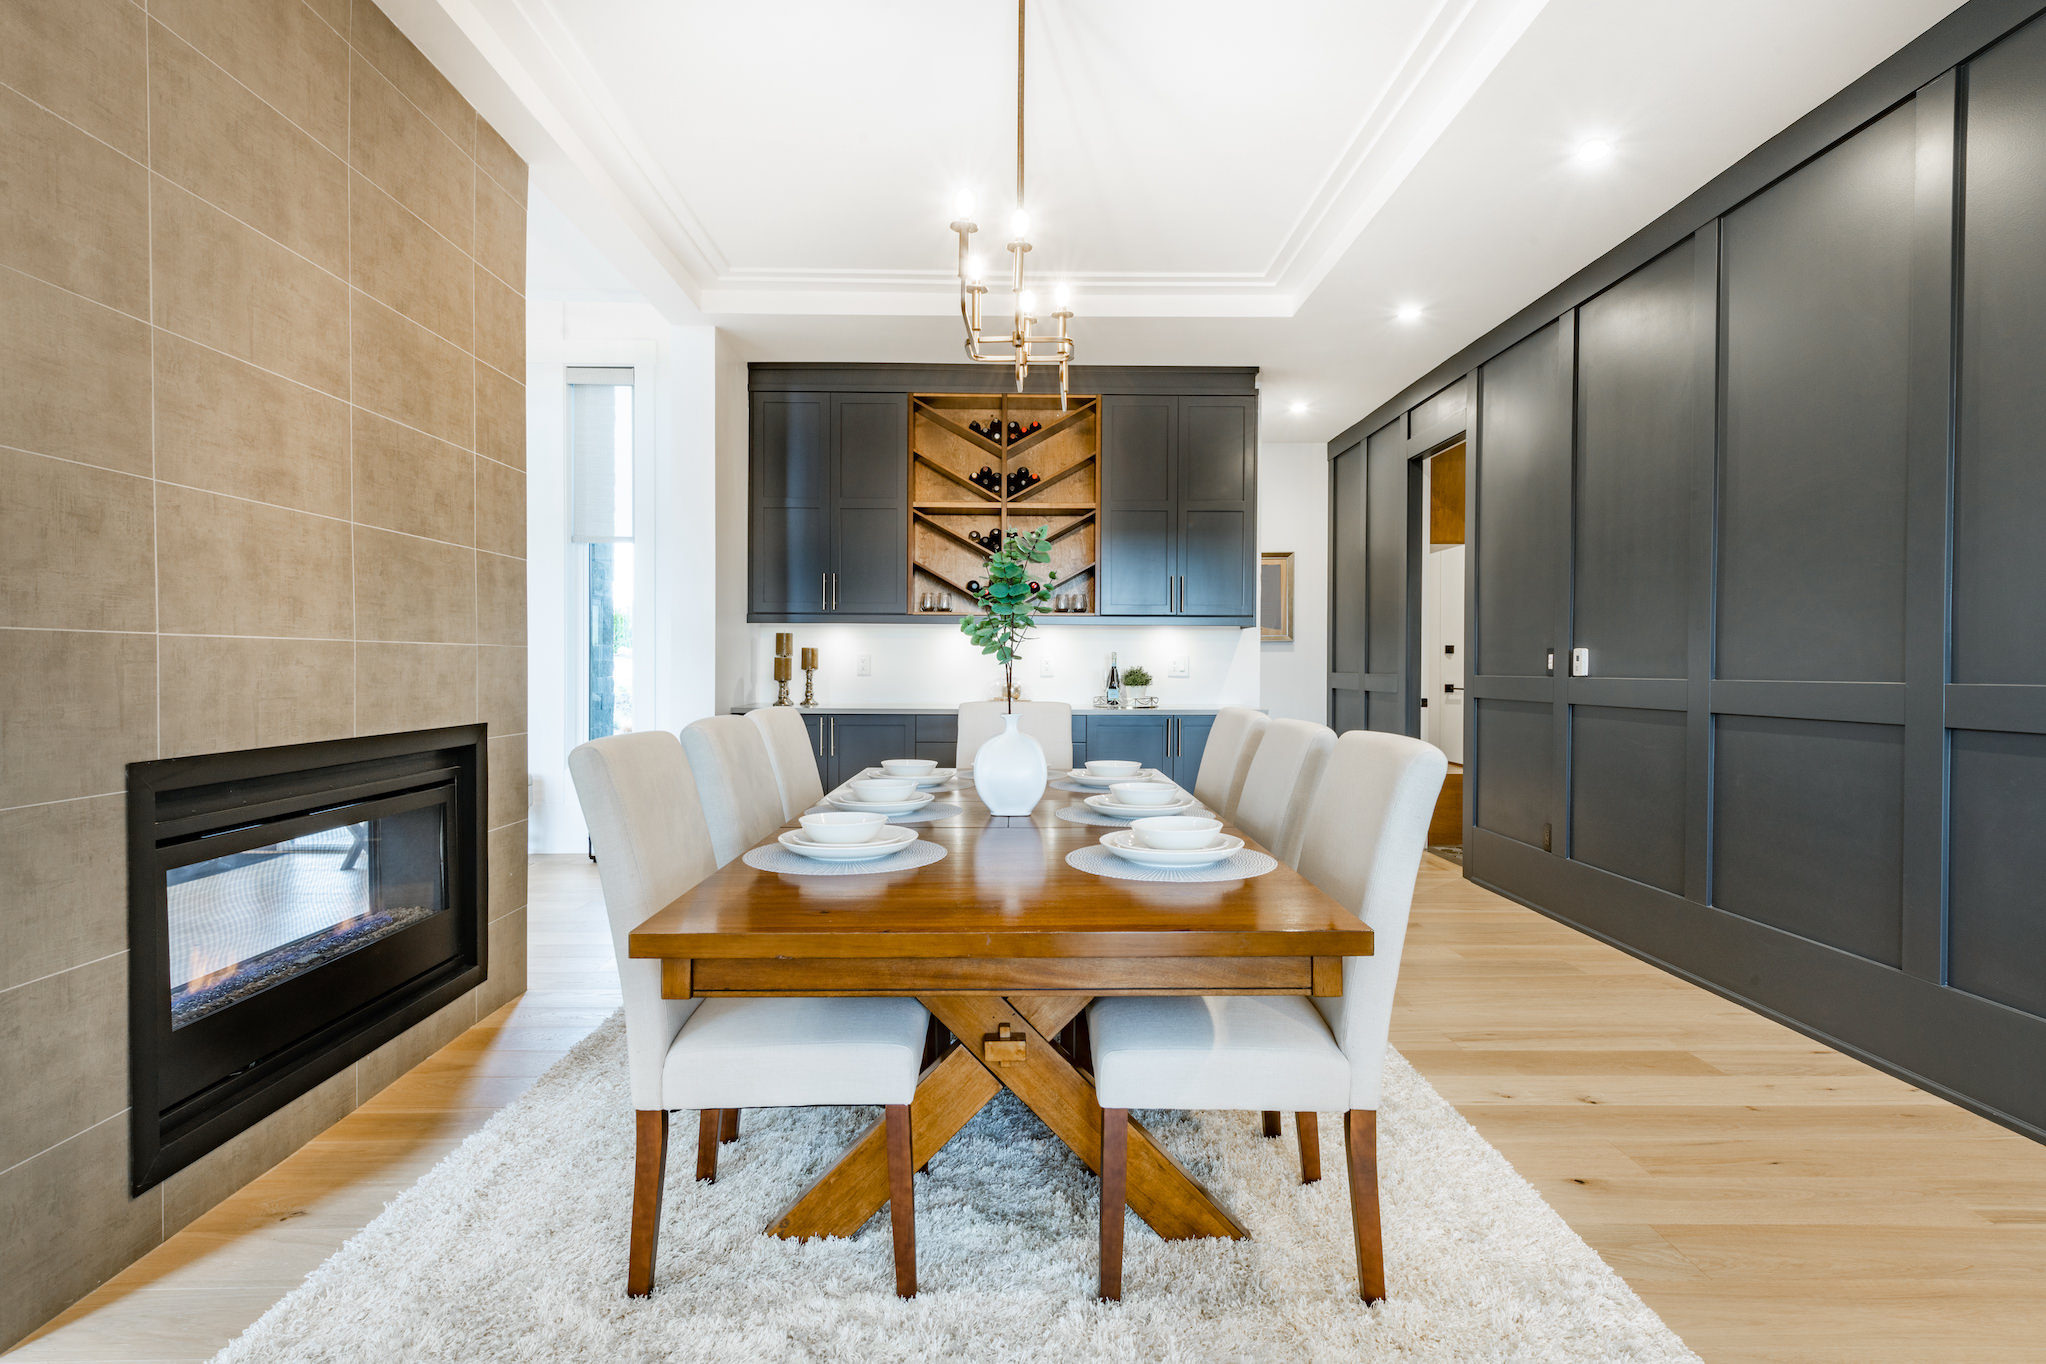 West Coast Contemporary Design Service – Vancouver (North, West and Metro)